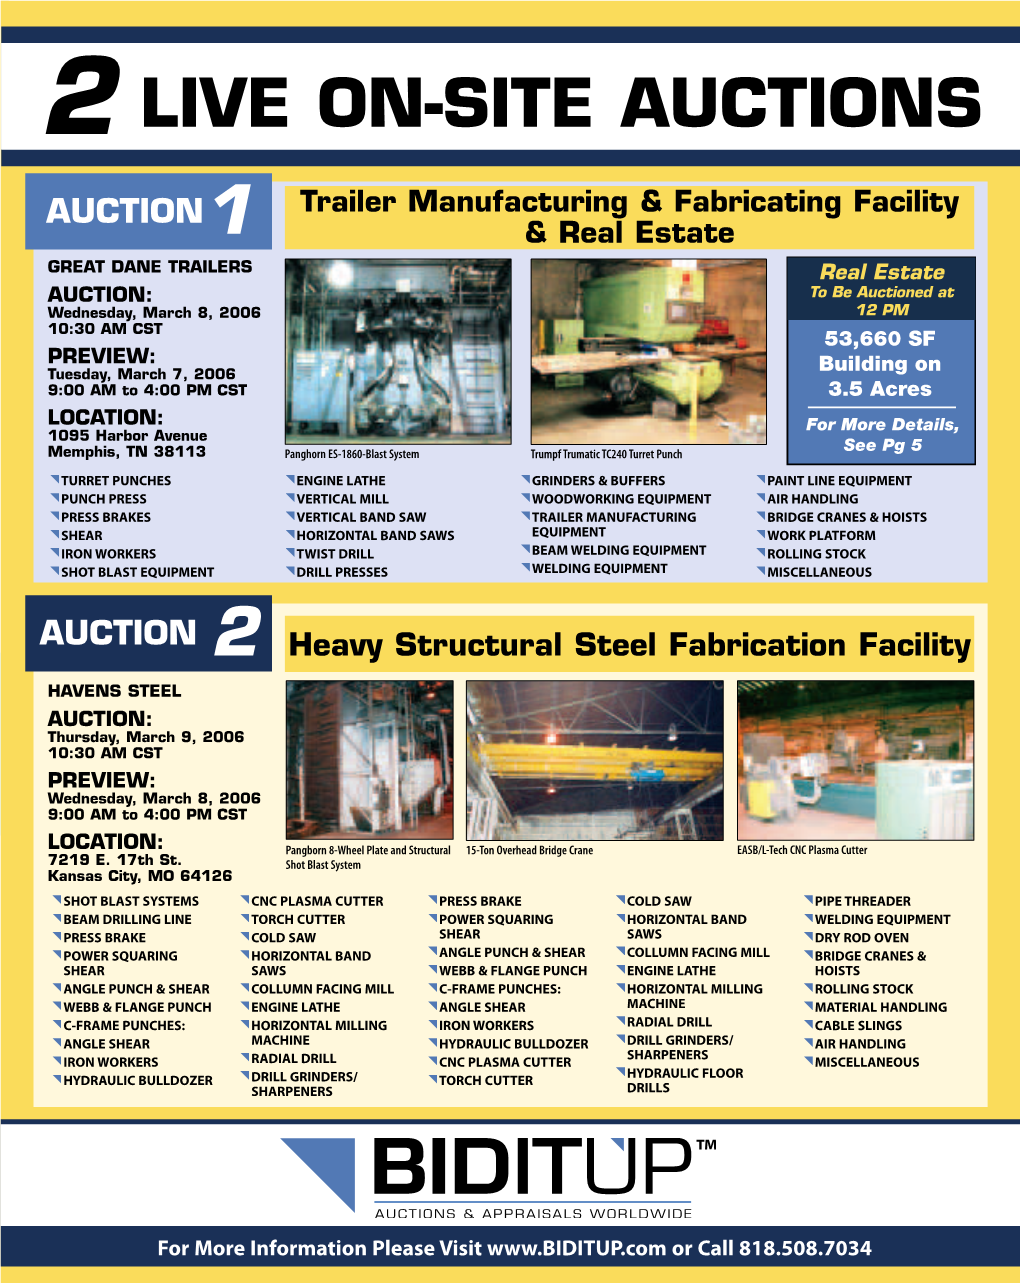 2 Live On-Site Auctions